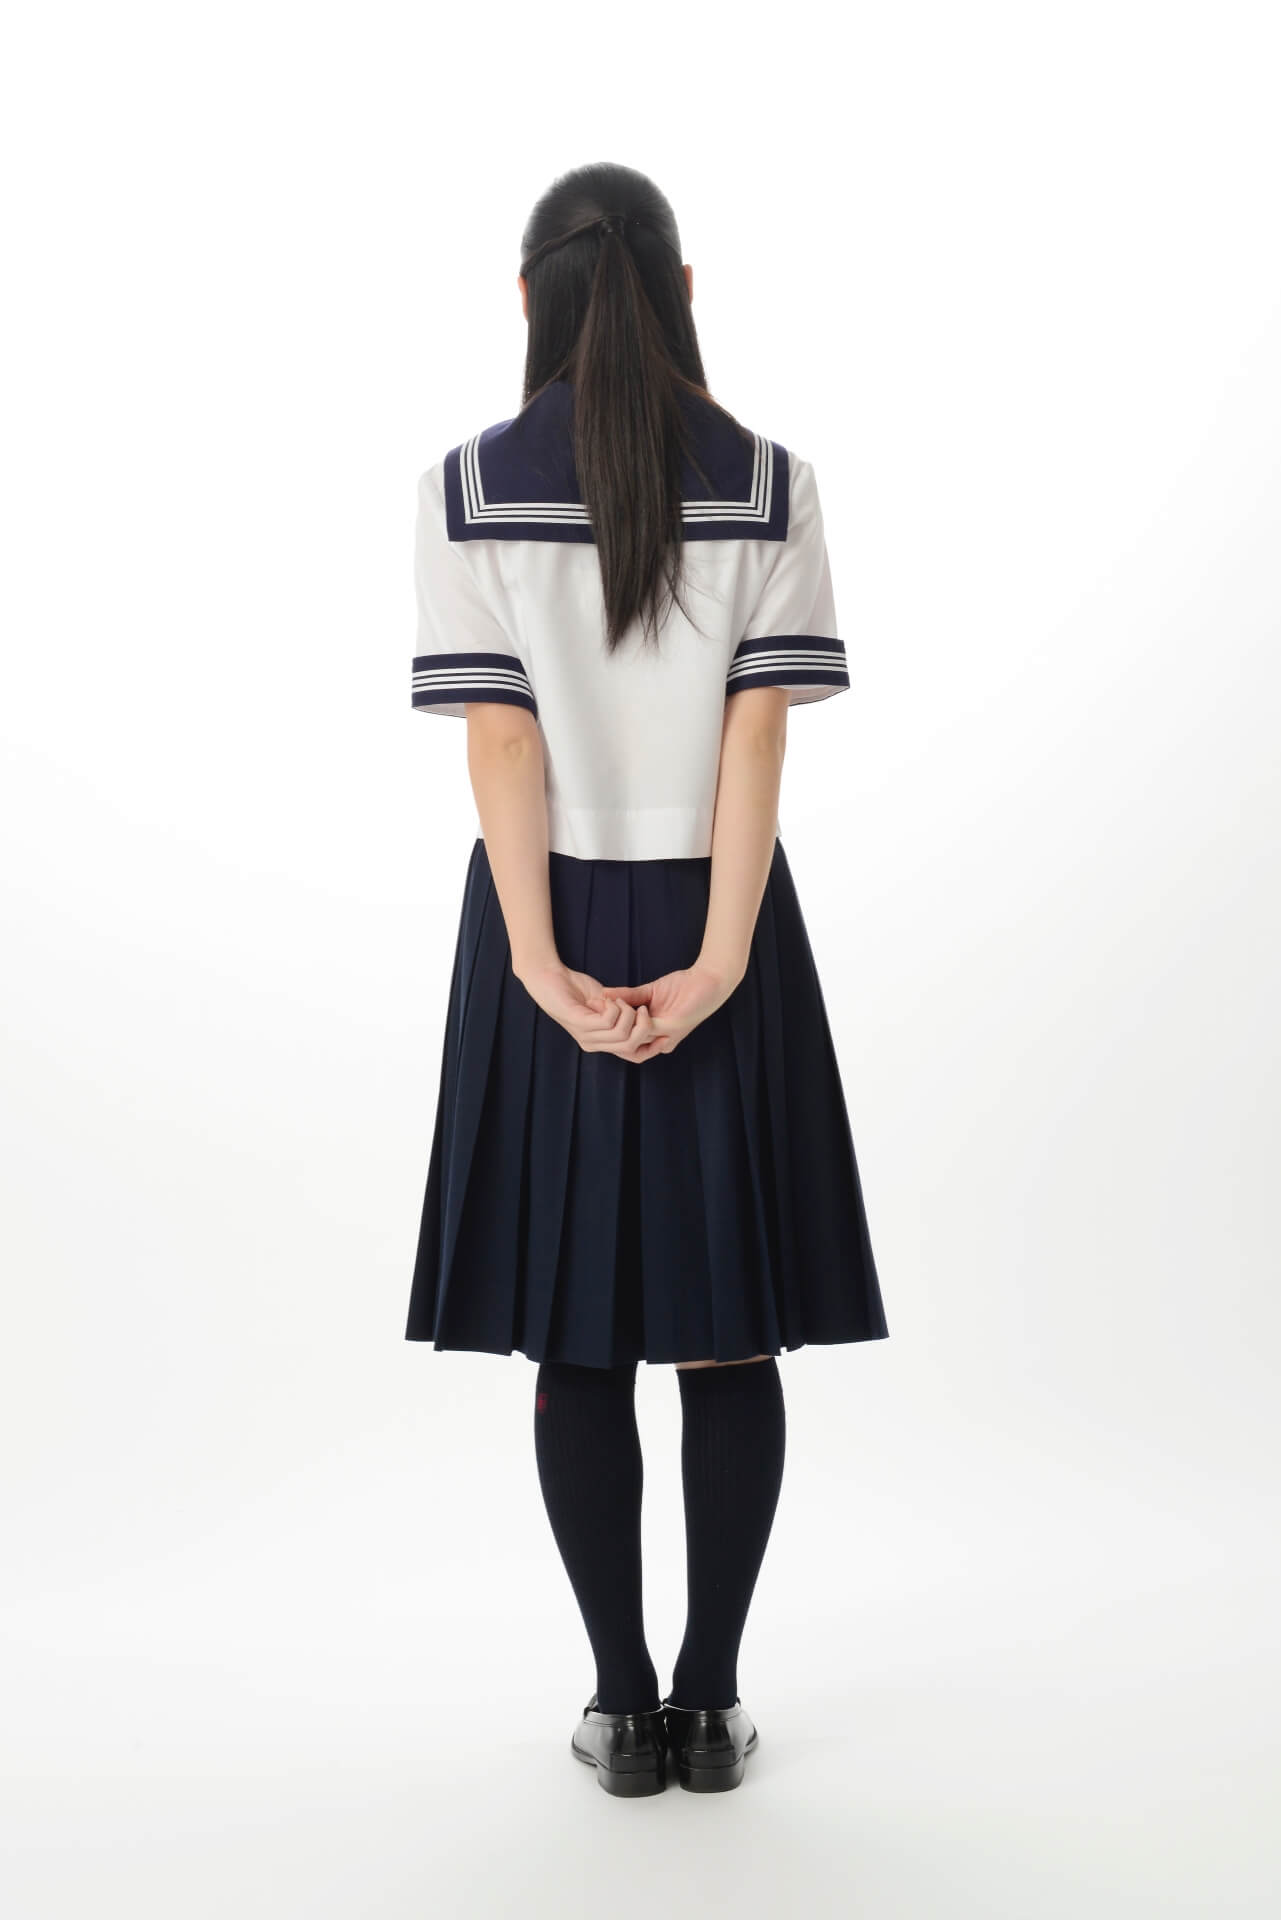 From Tradition To Today Japanese School Uniforms